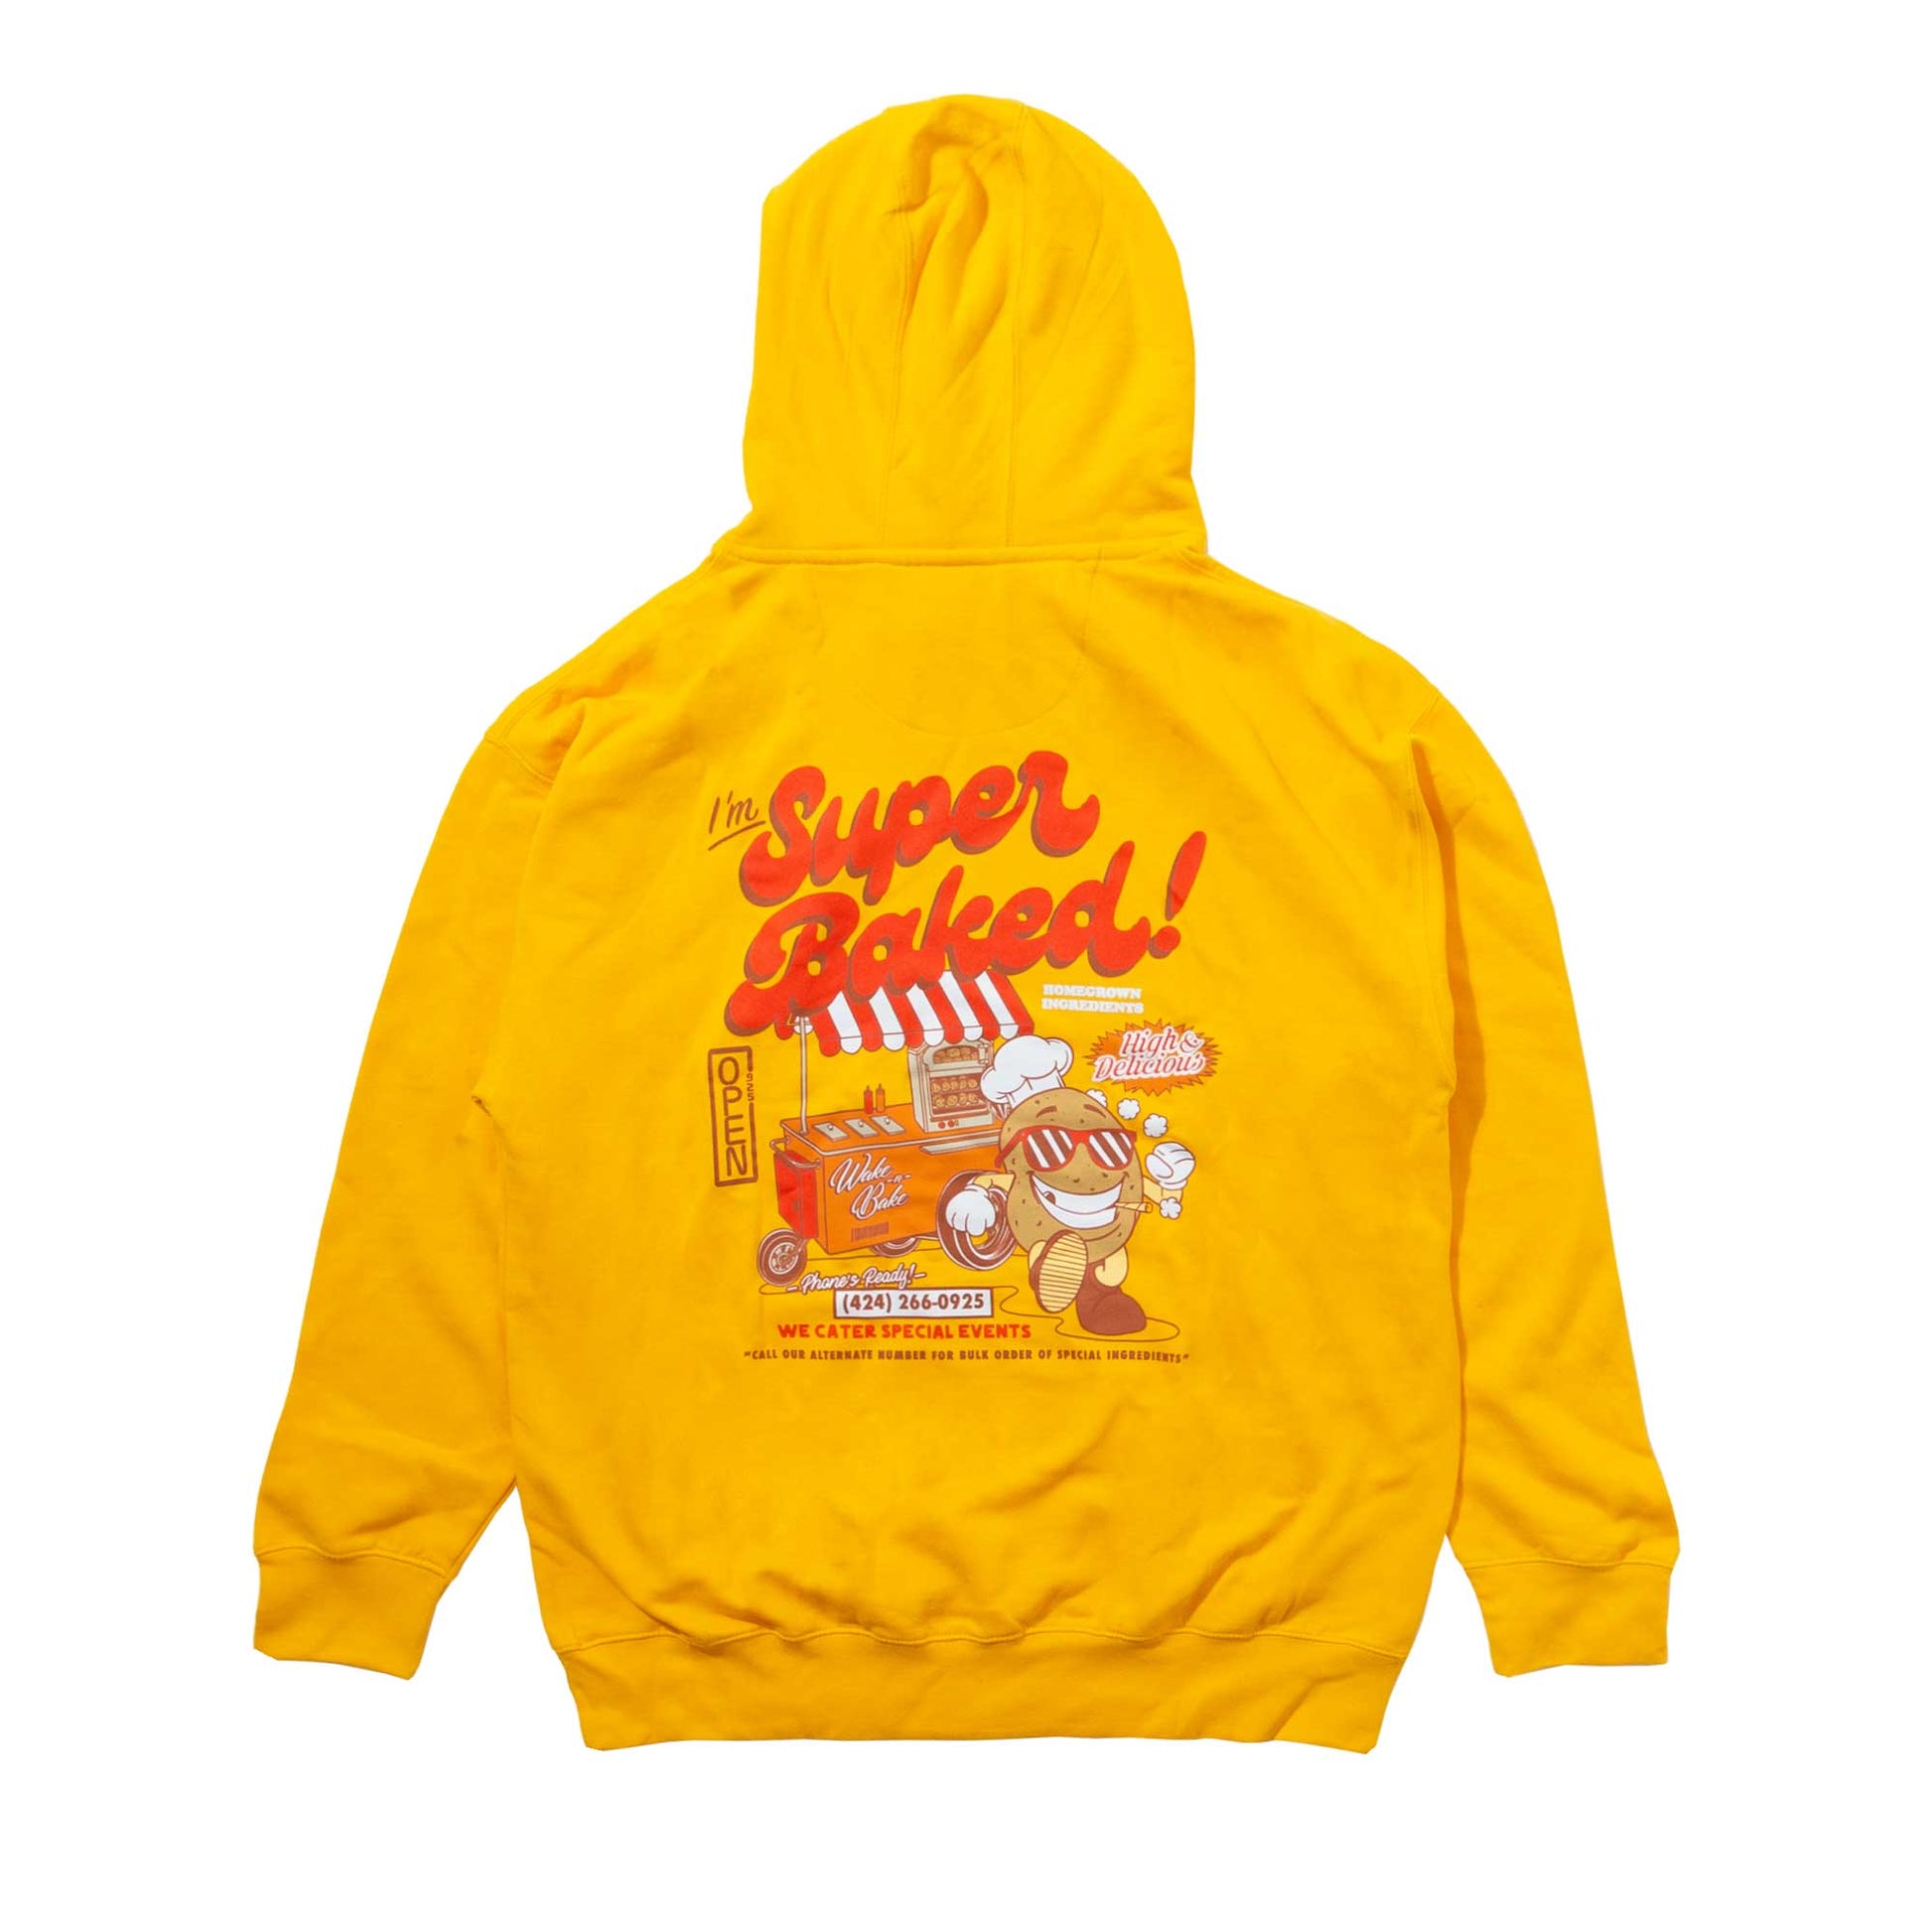 Super Baked Hoodie Gold-Open 925